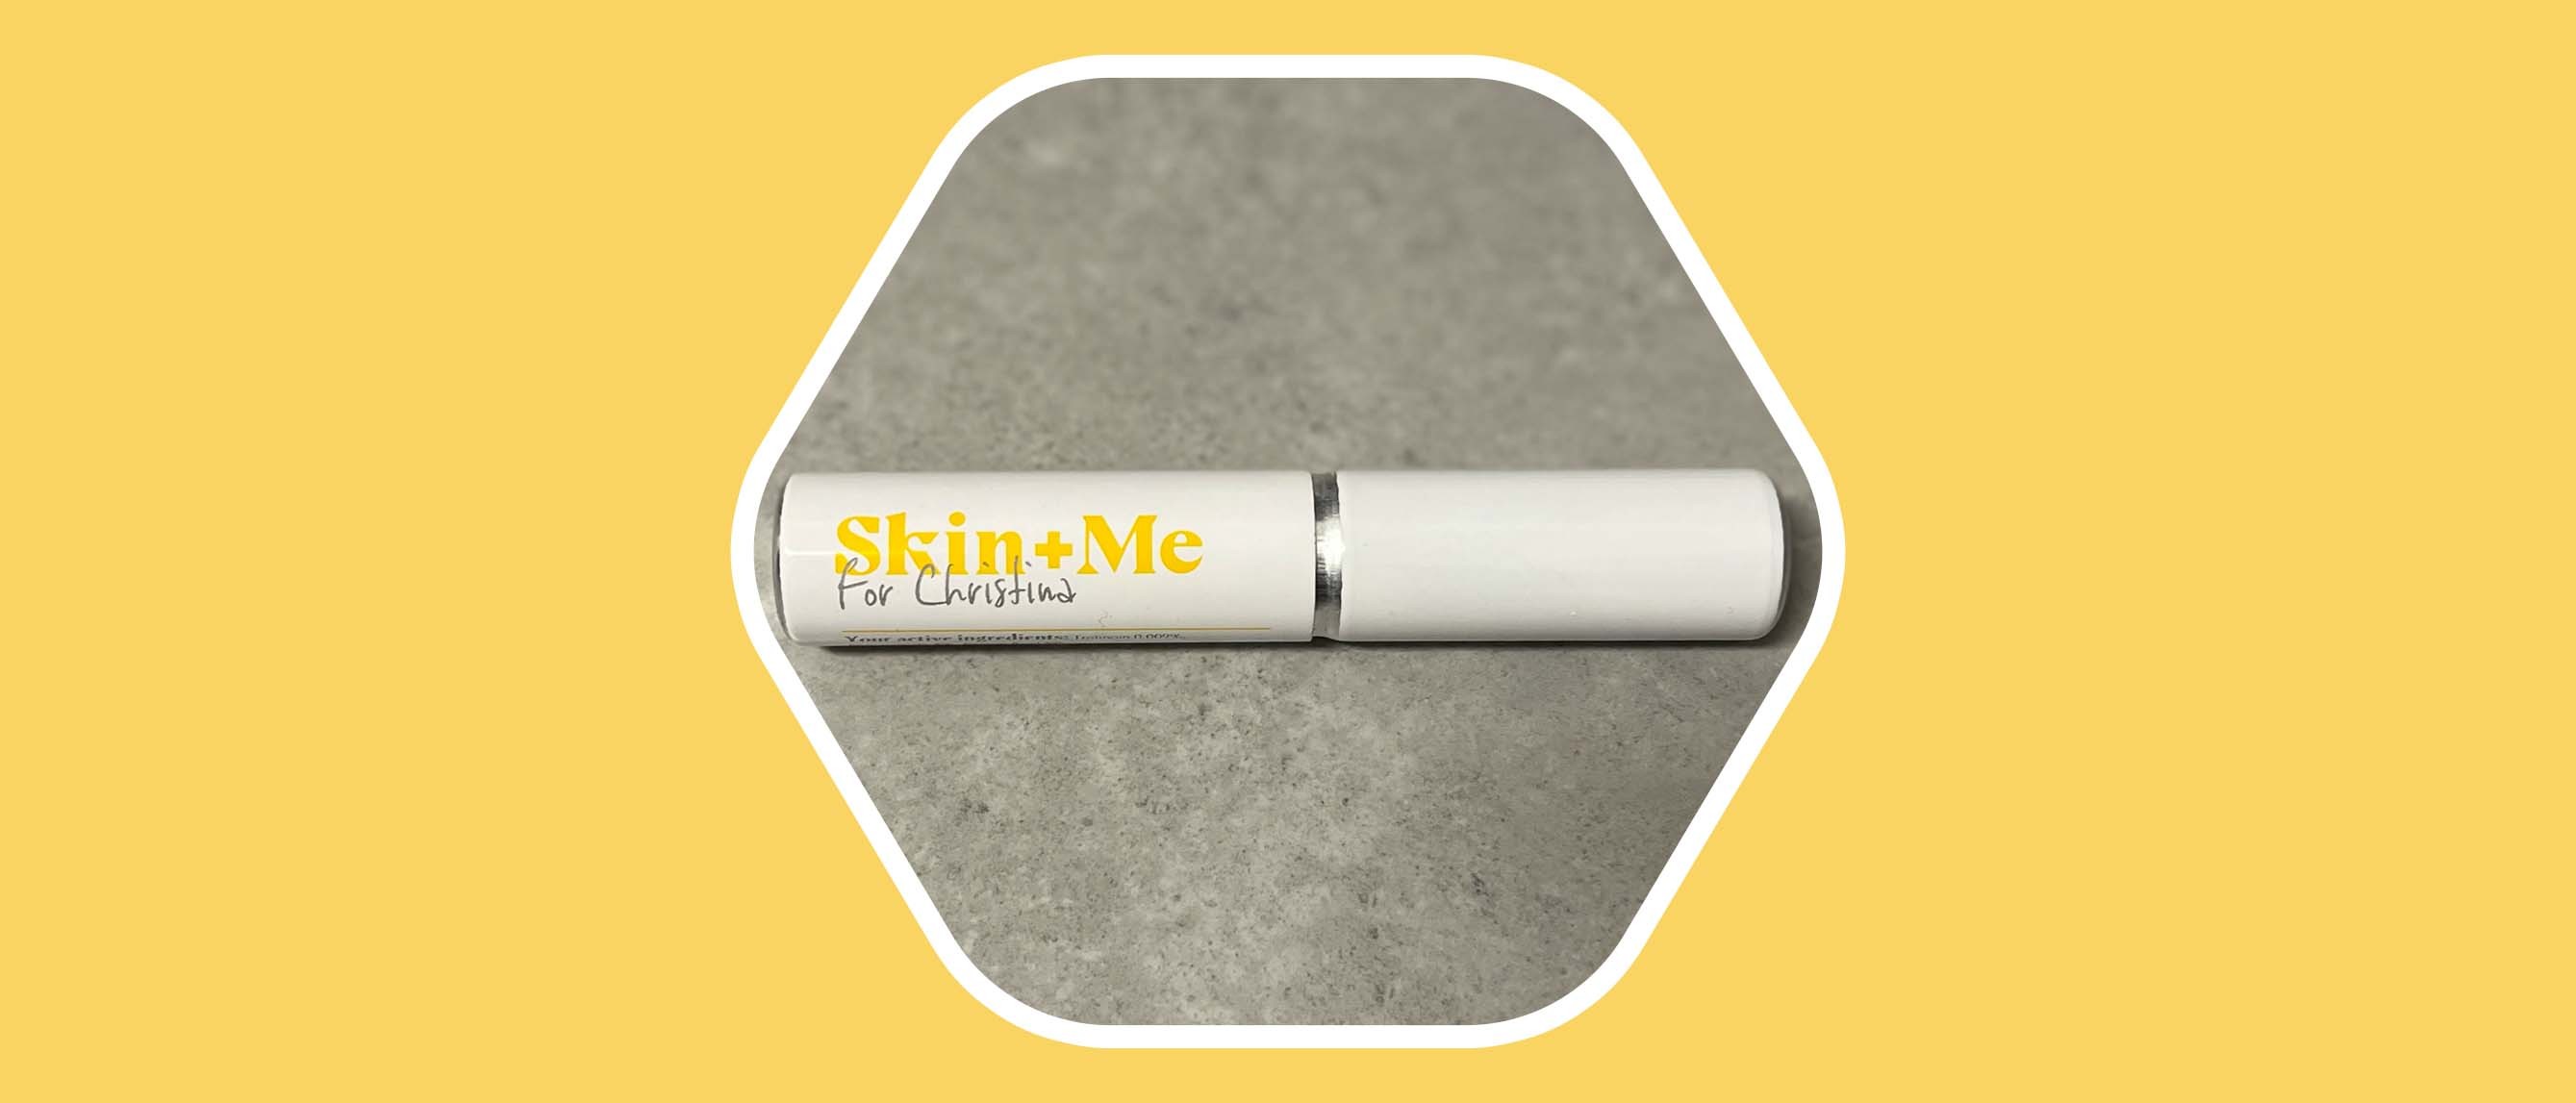 Skin + Me: Our editor’s honest review of the skincare brand